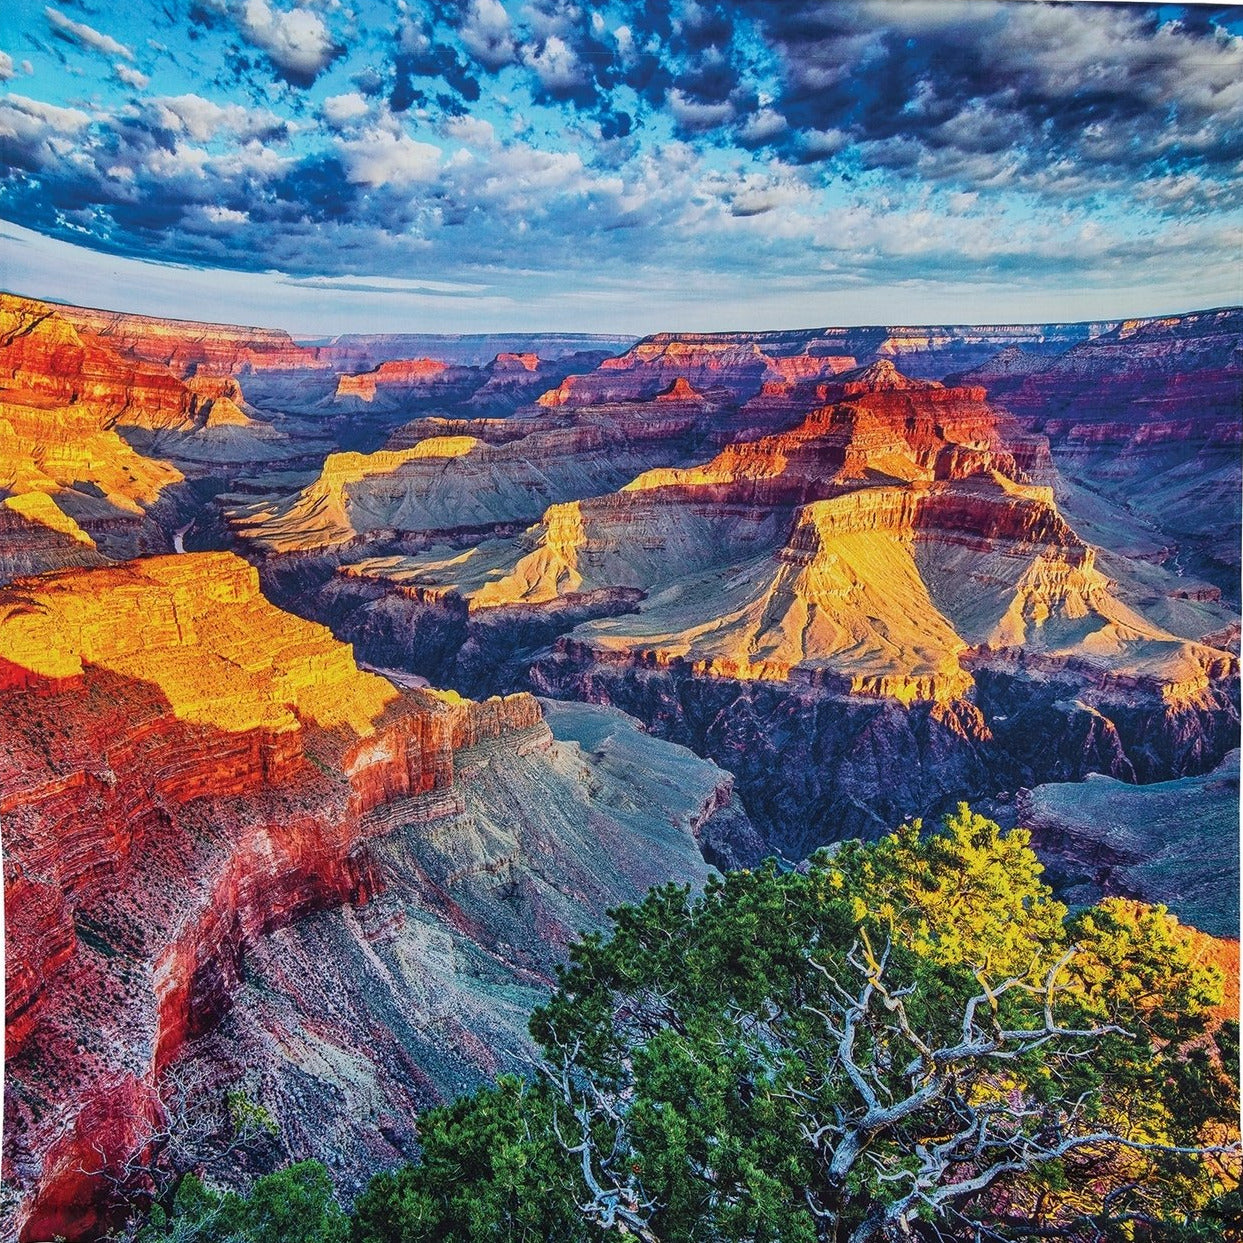 Grand Canyon Sunset Photo Tapestry and Hanging Wall Art (Extra Large, 4.8 x 4.8 Feet, 100% Cotton) - PaperLanternStore.com - Paper Lanterns, Decor, Party Lights & More